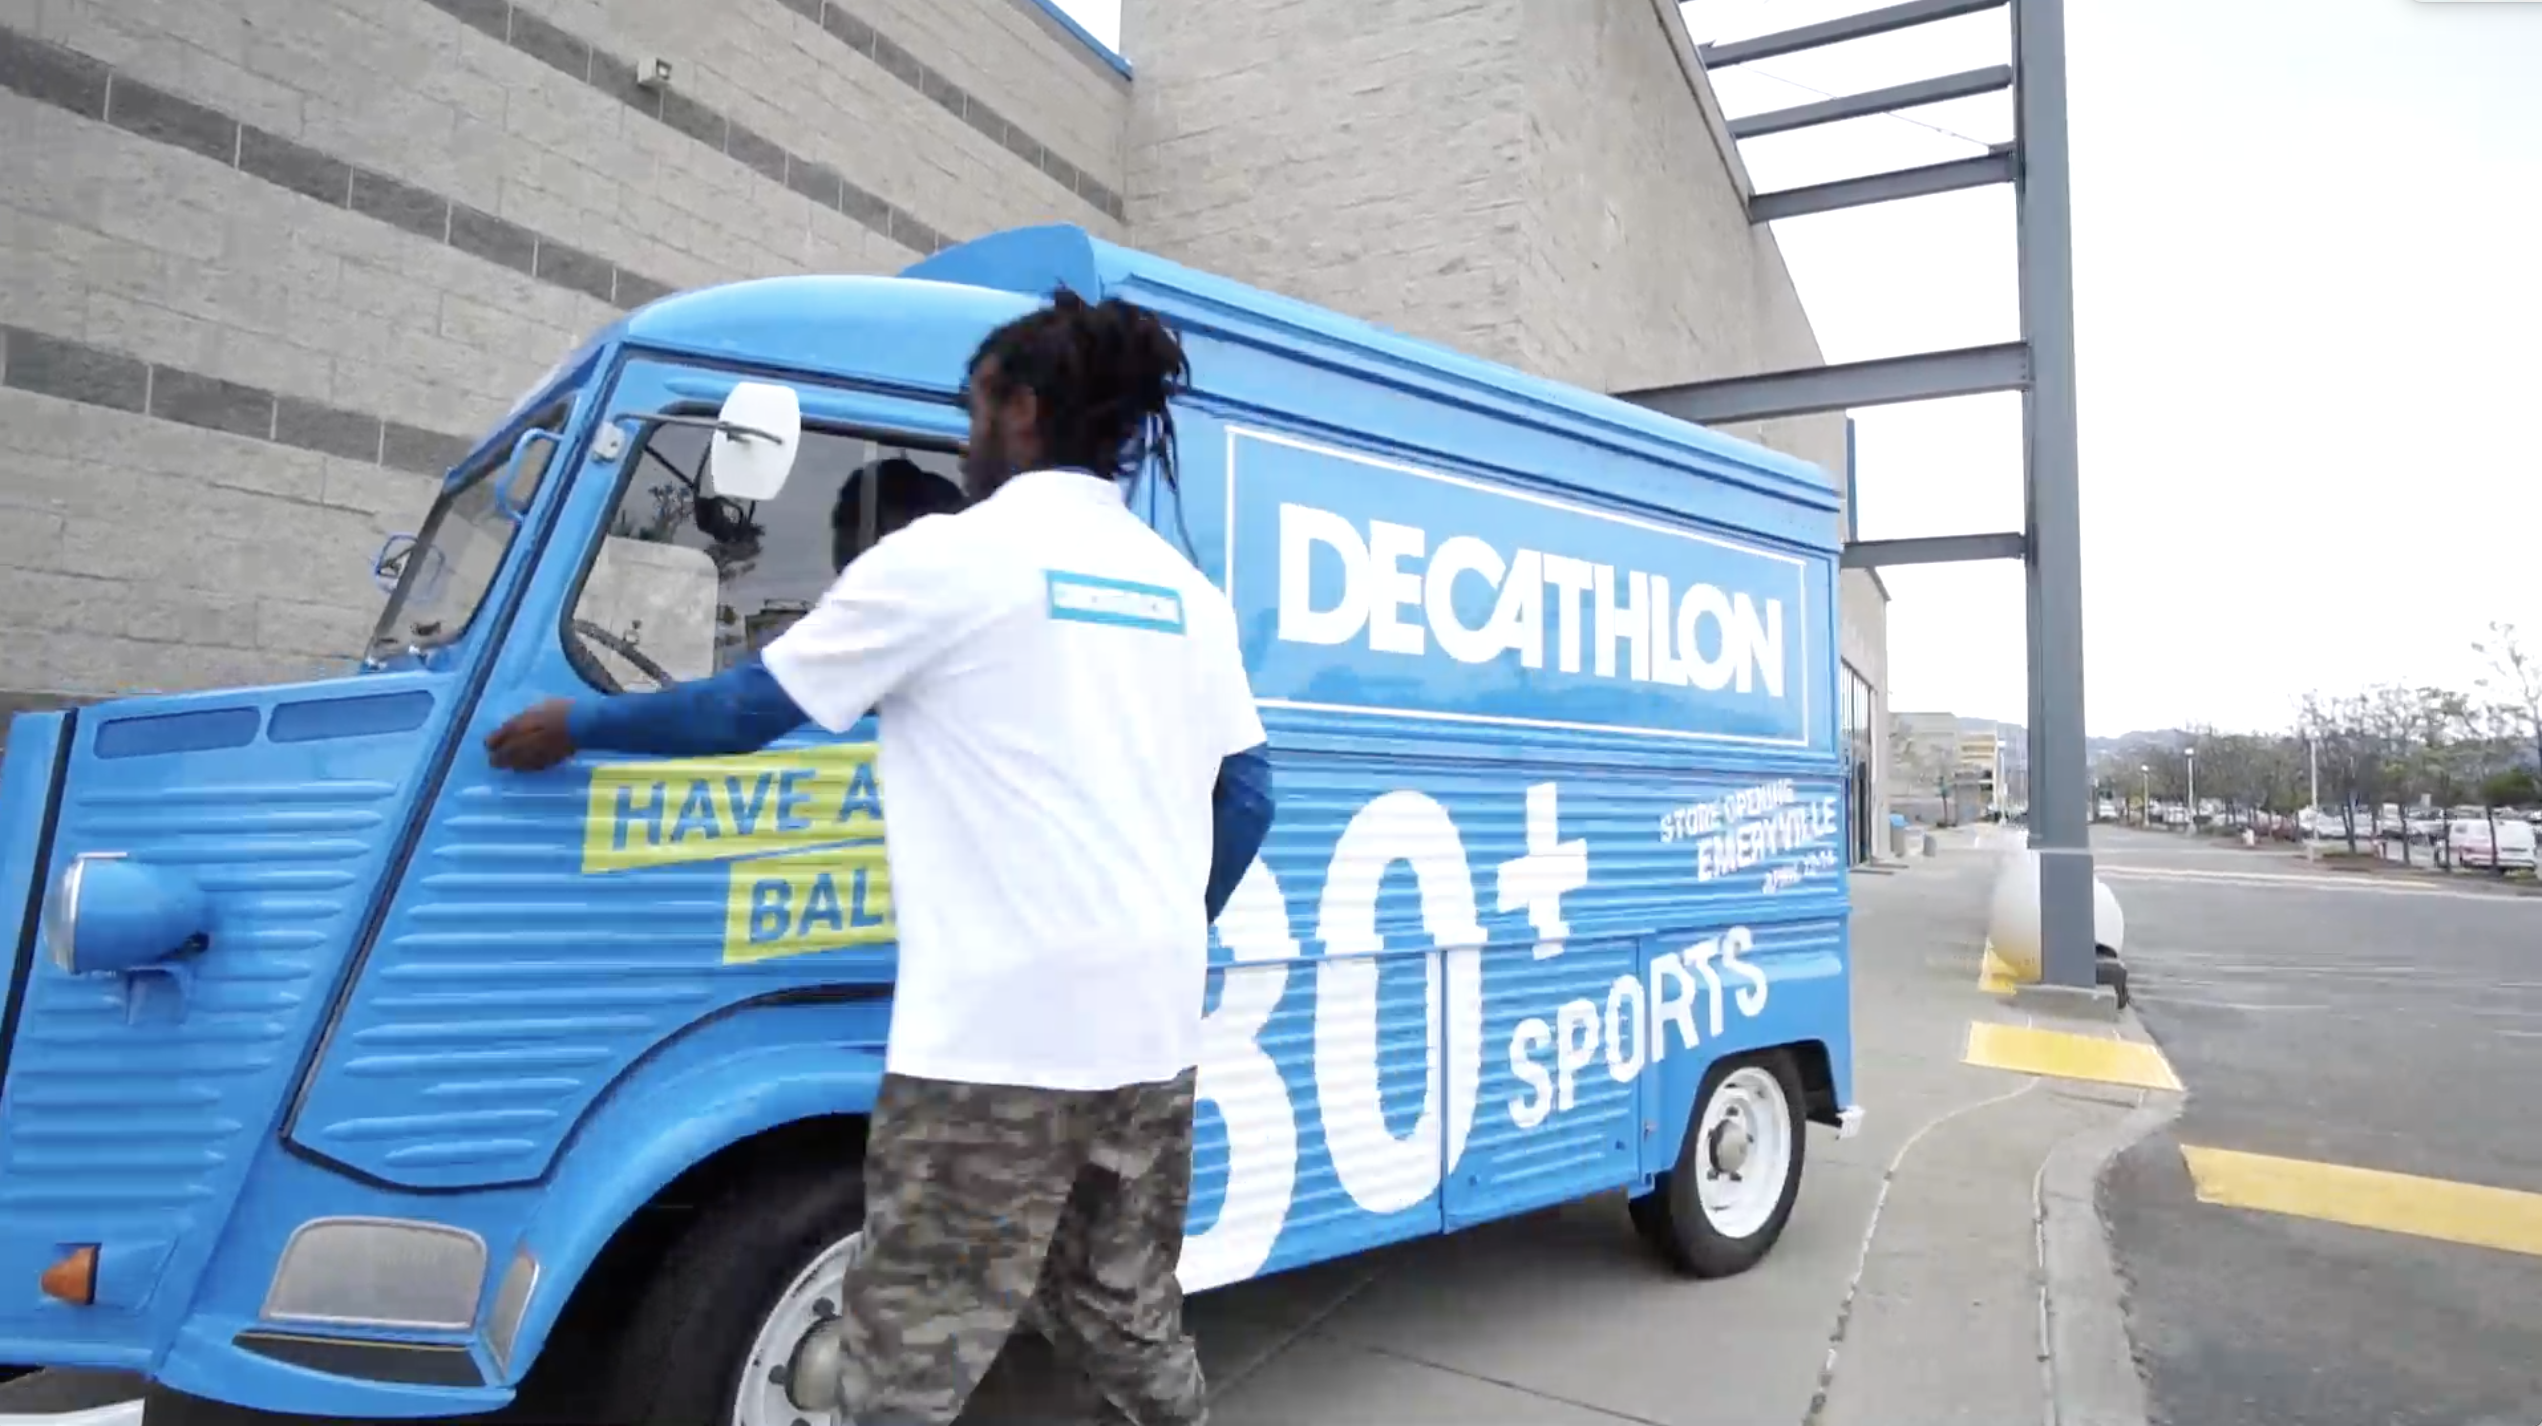 Decathlon USA - Le Blue is here waiting for you. Come to the store to  discover a new sport today!